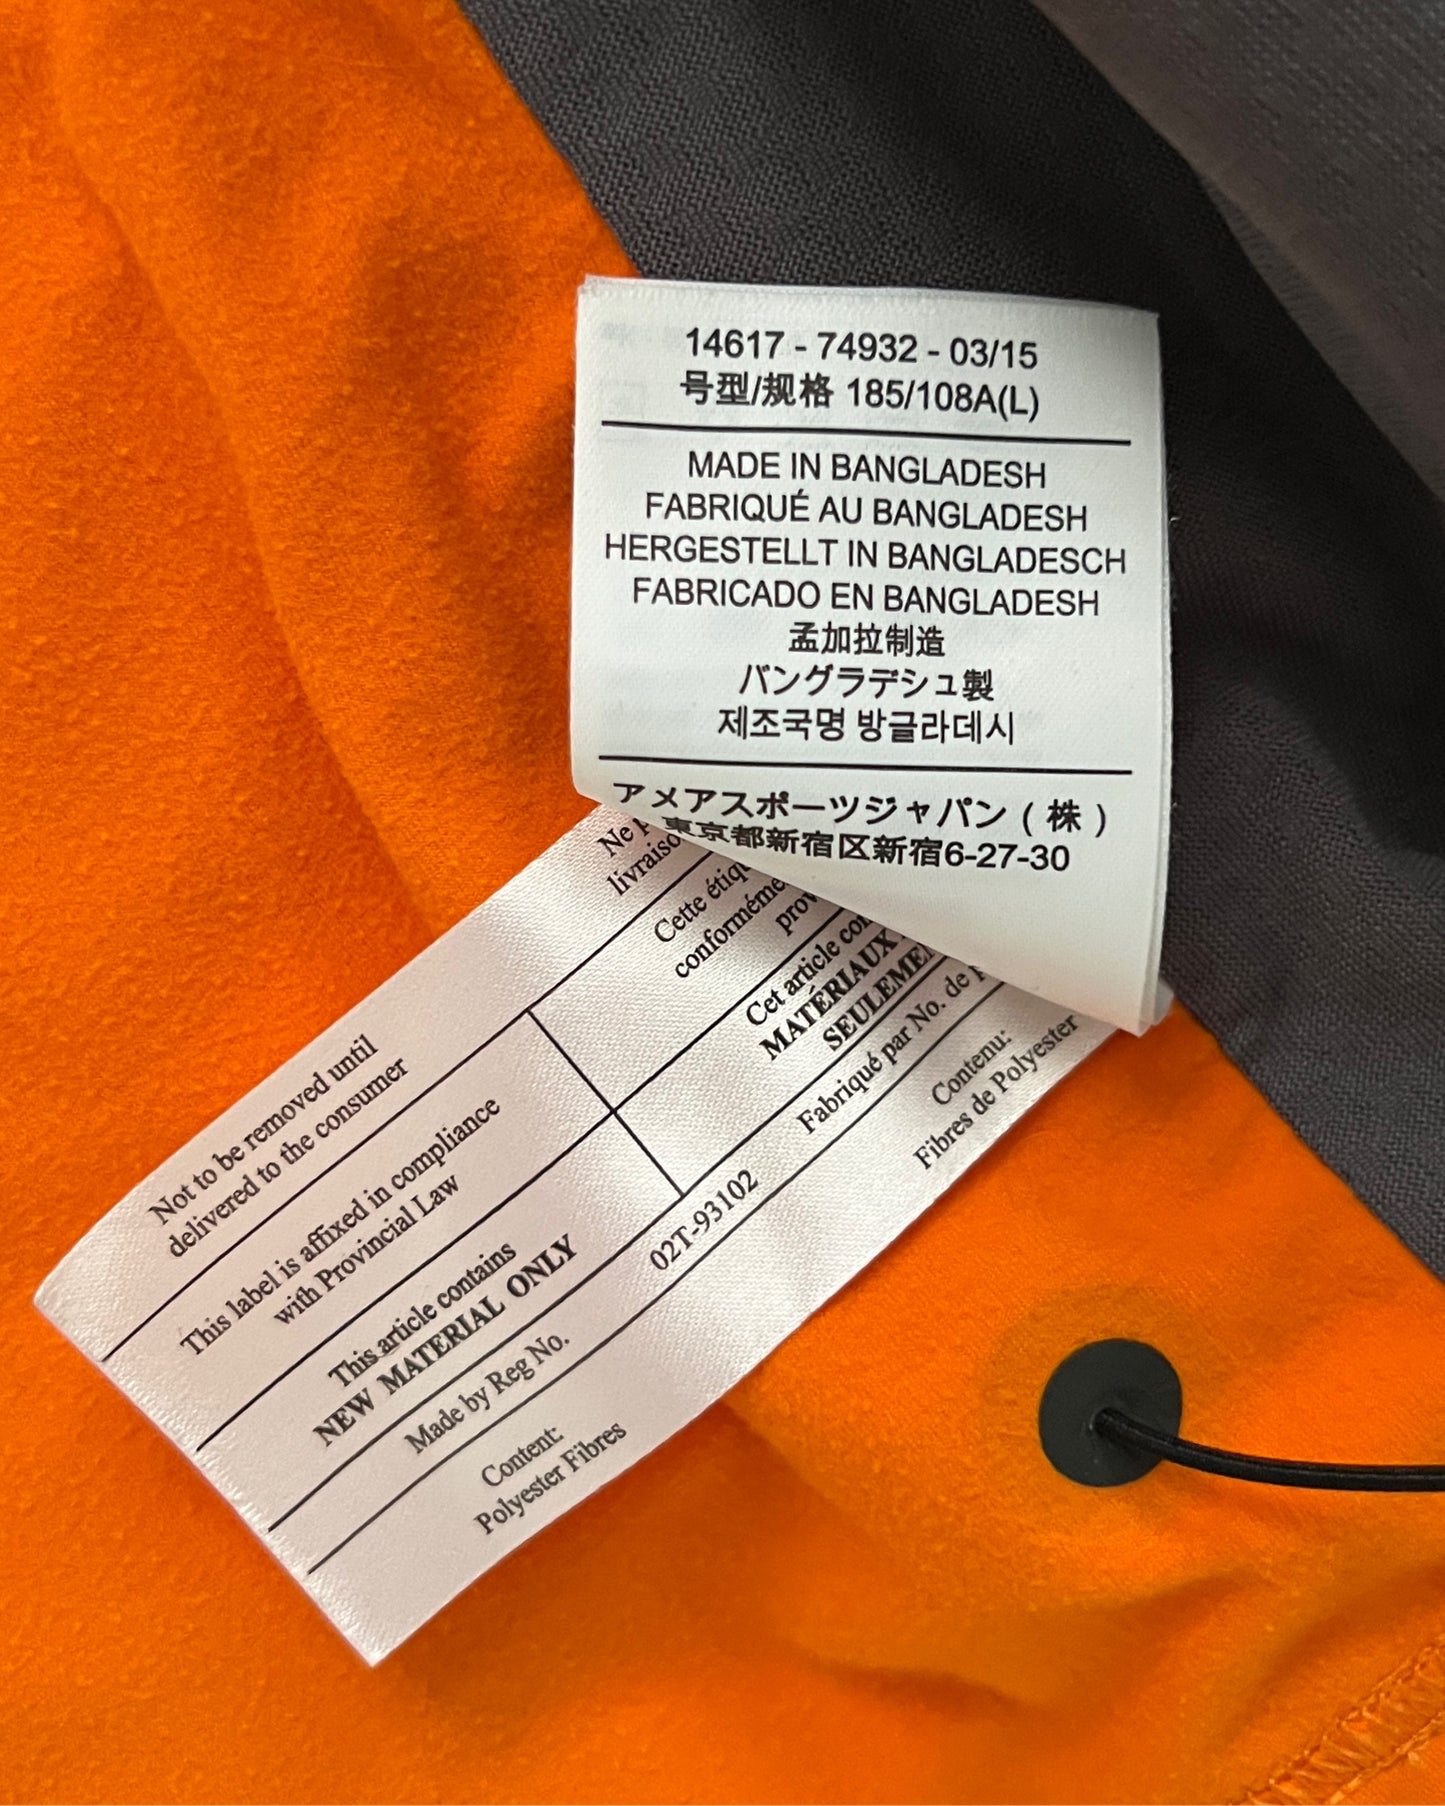 Arcteryx Argus Insulated Windproof Jacket - Size L